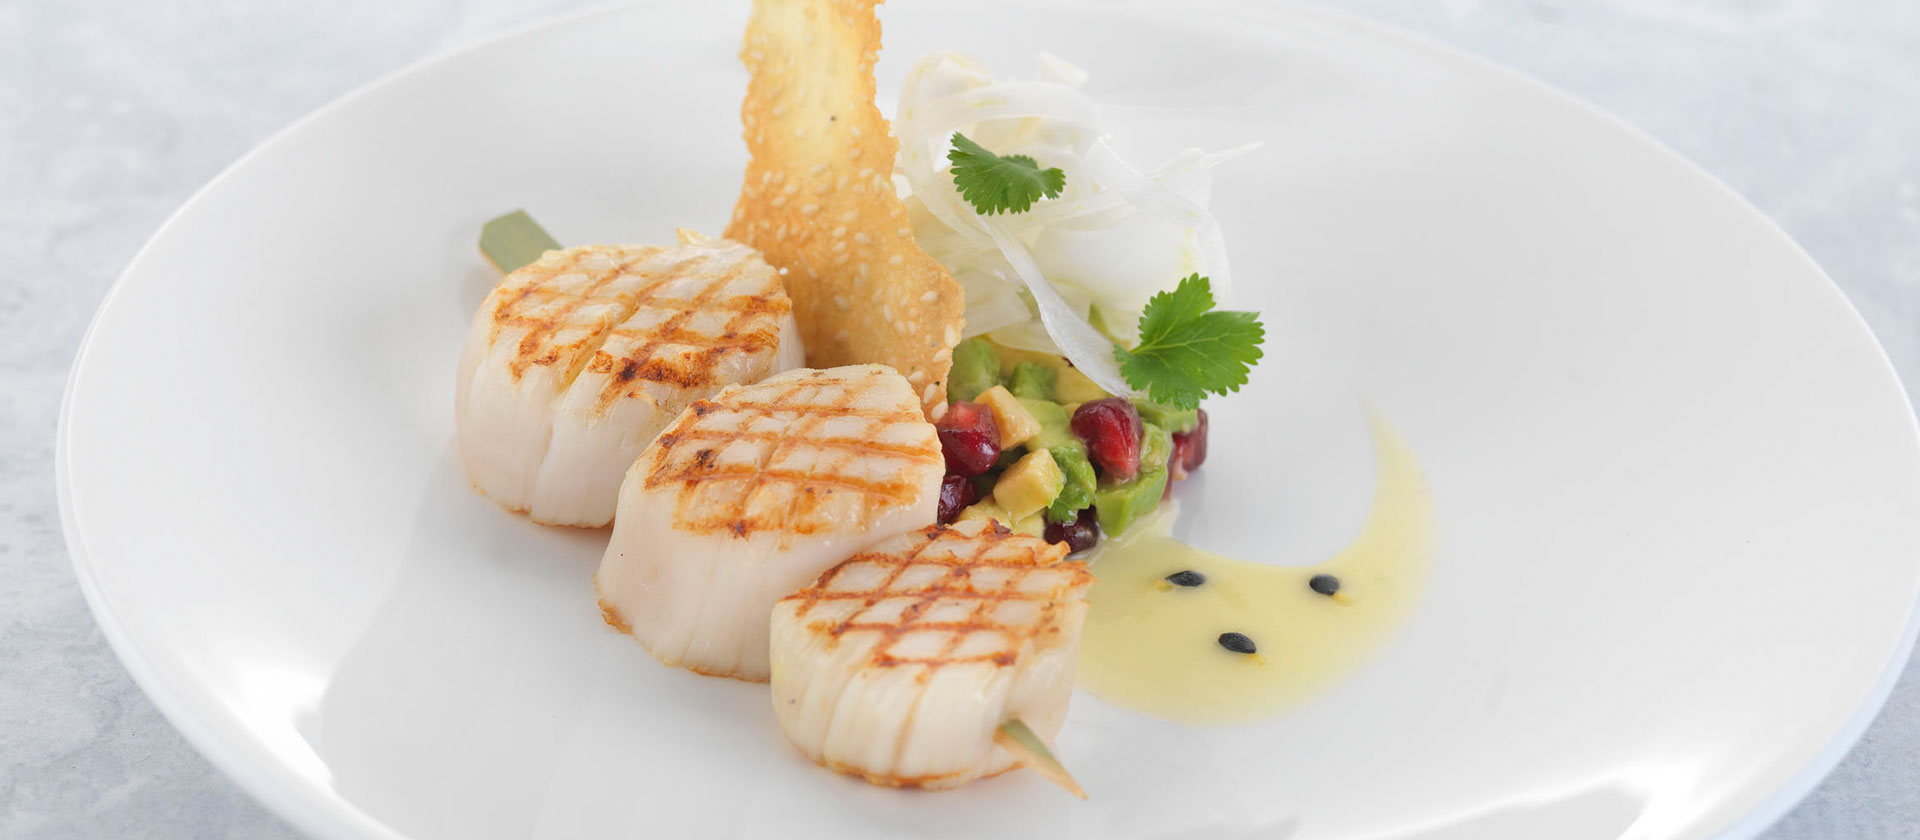 Grilled Scallop Salad